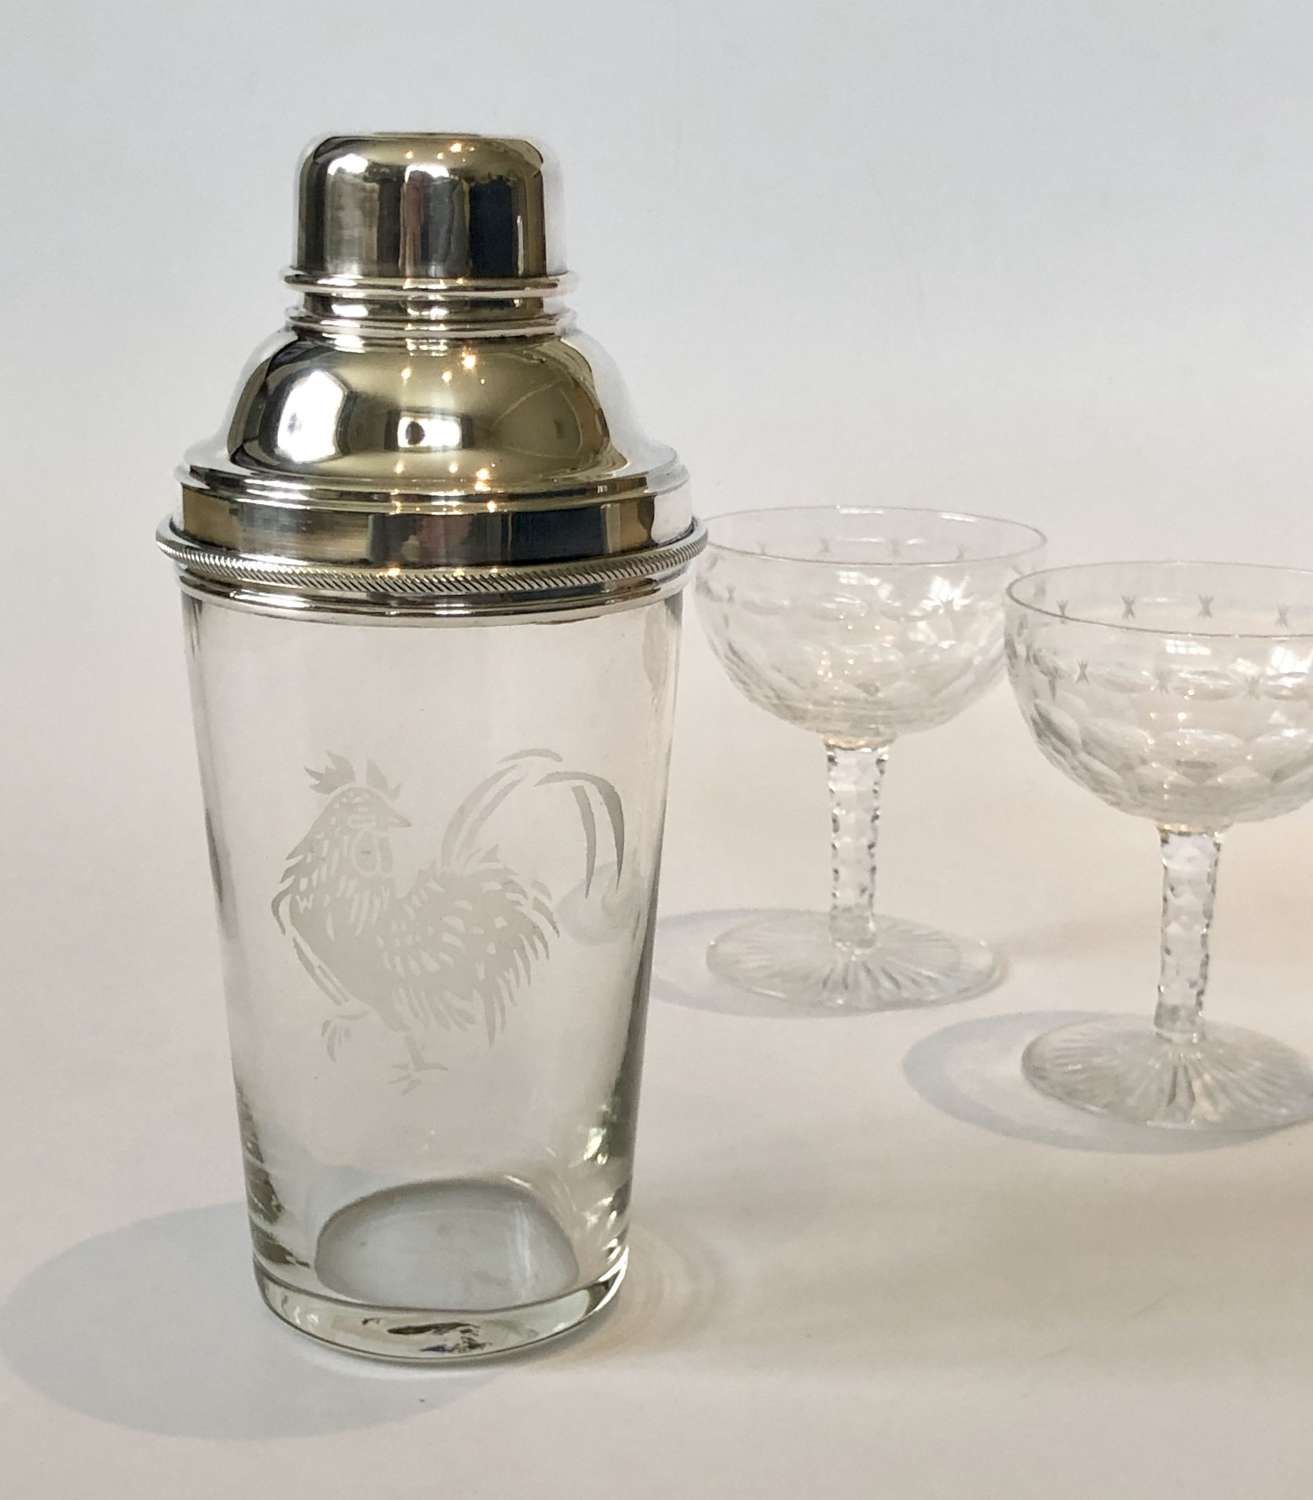 English etched glass cockerel cocktail shaker